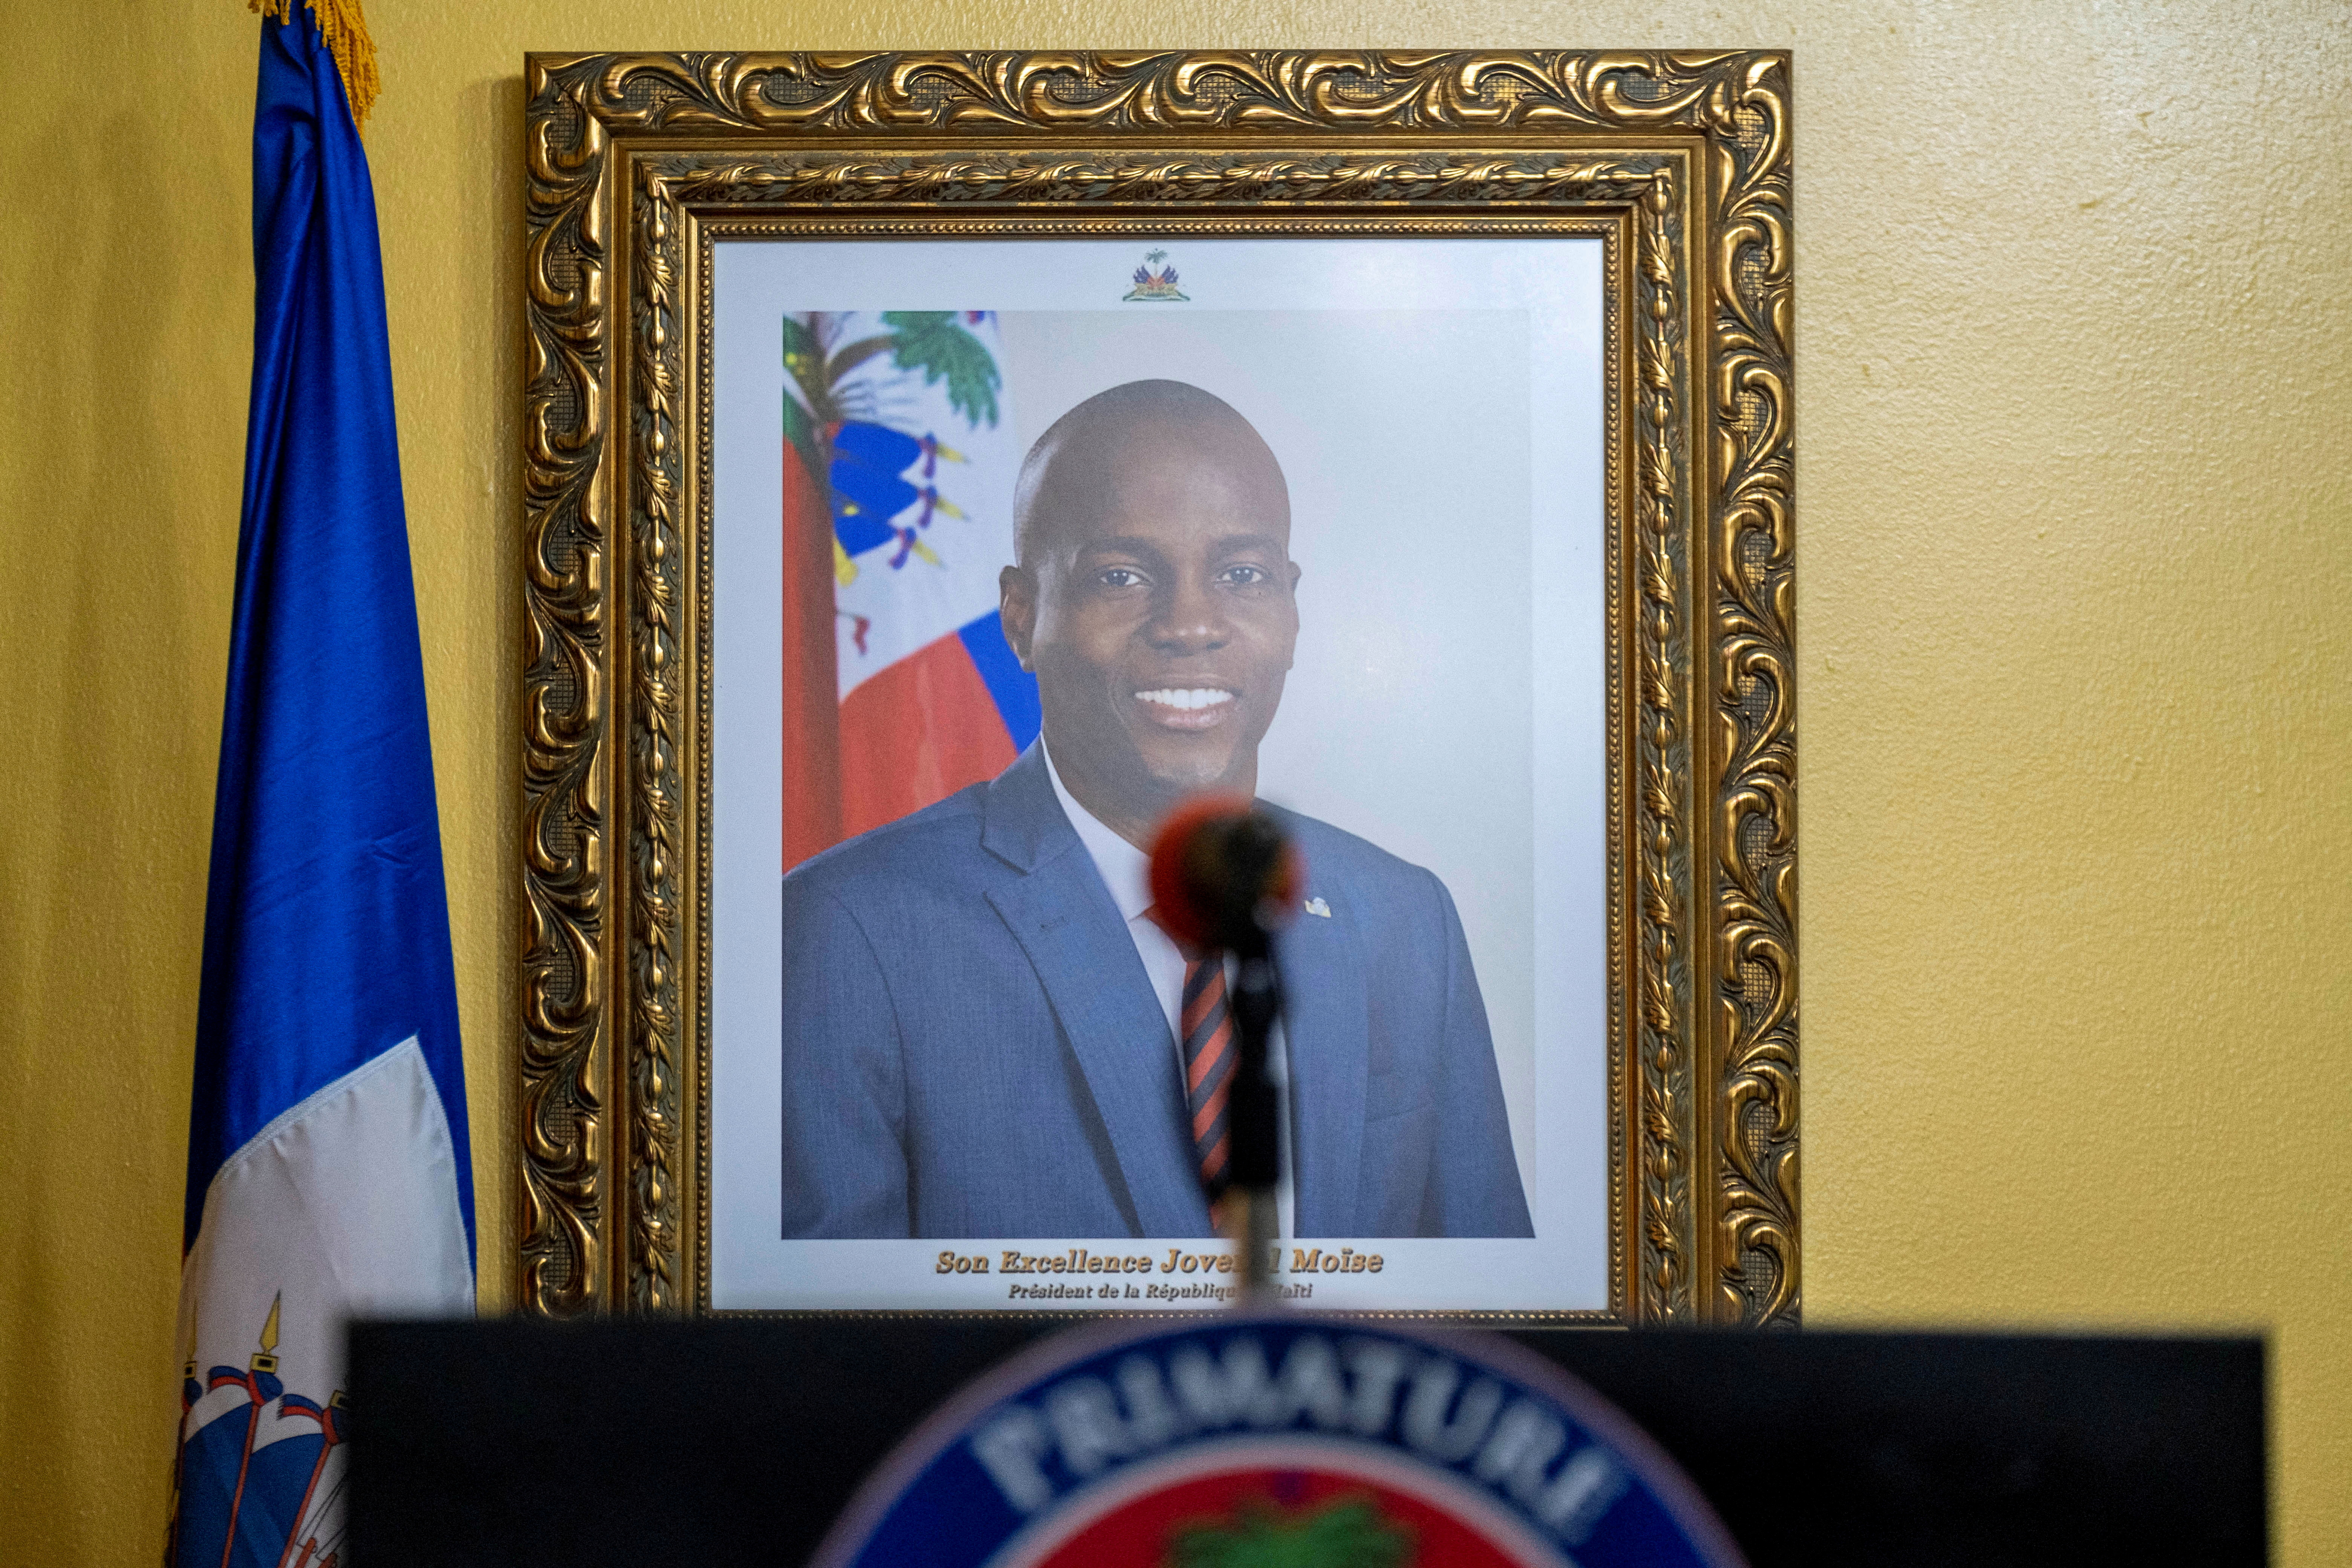 A picture of the late Haitian President Jovenel Moise hangs on a wall before a news conference